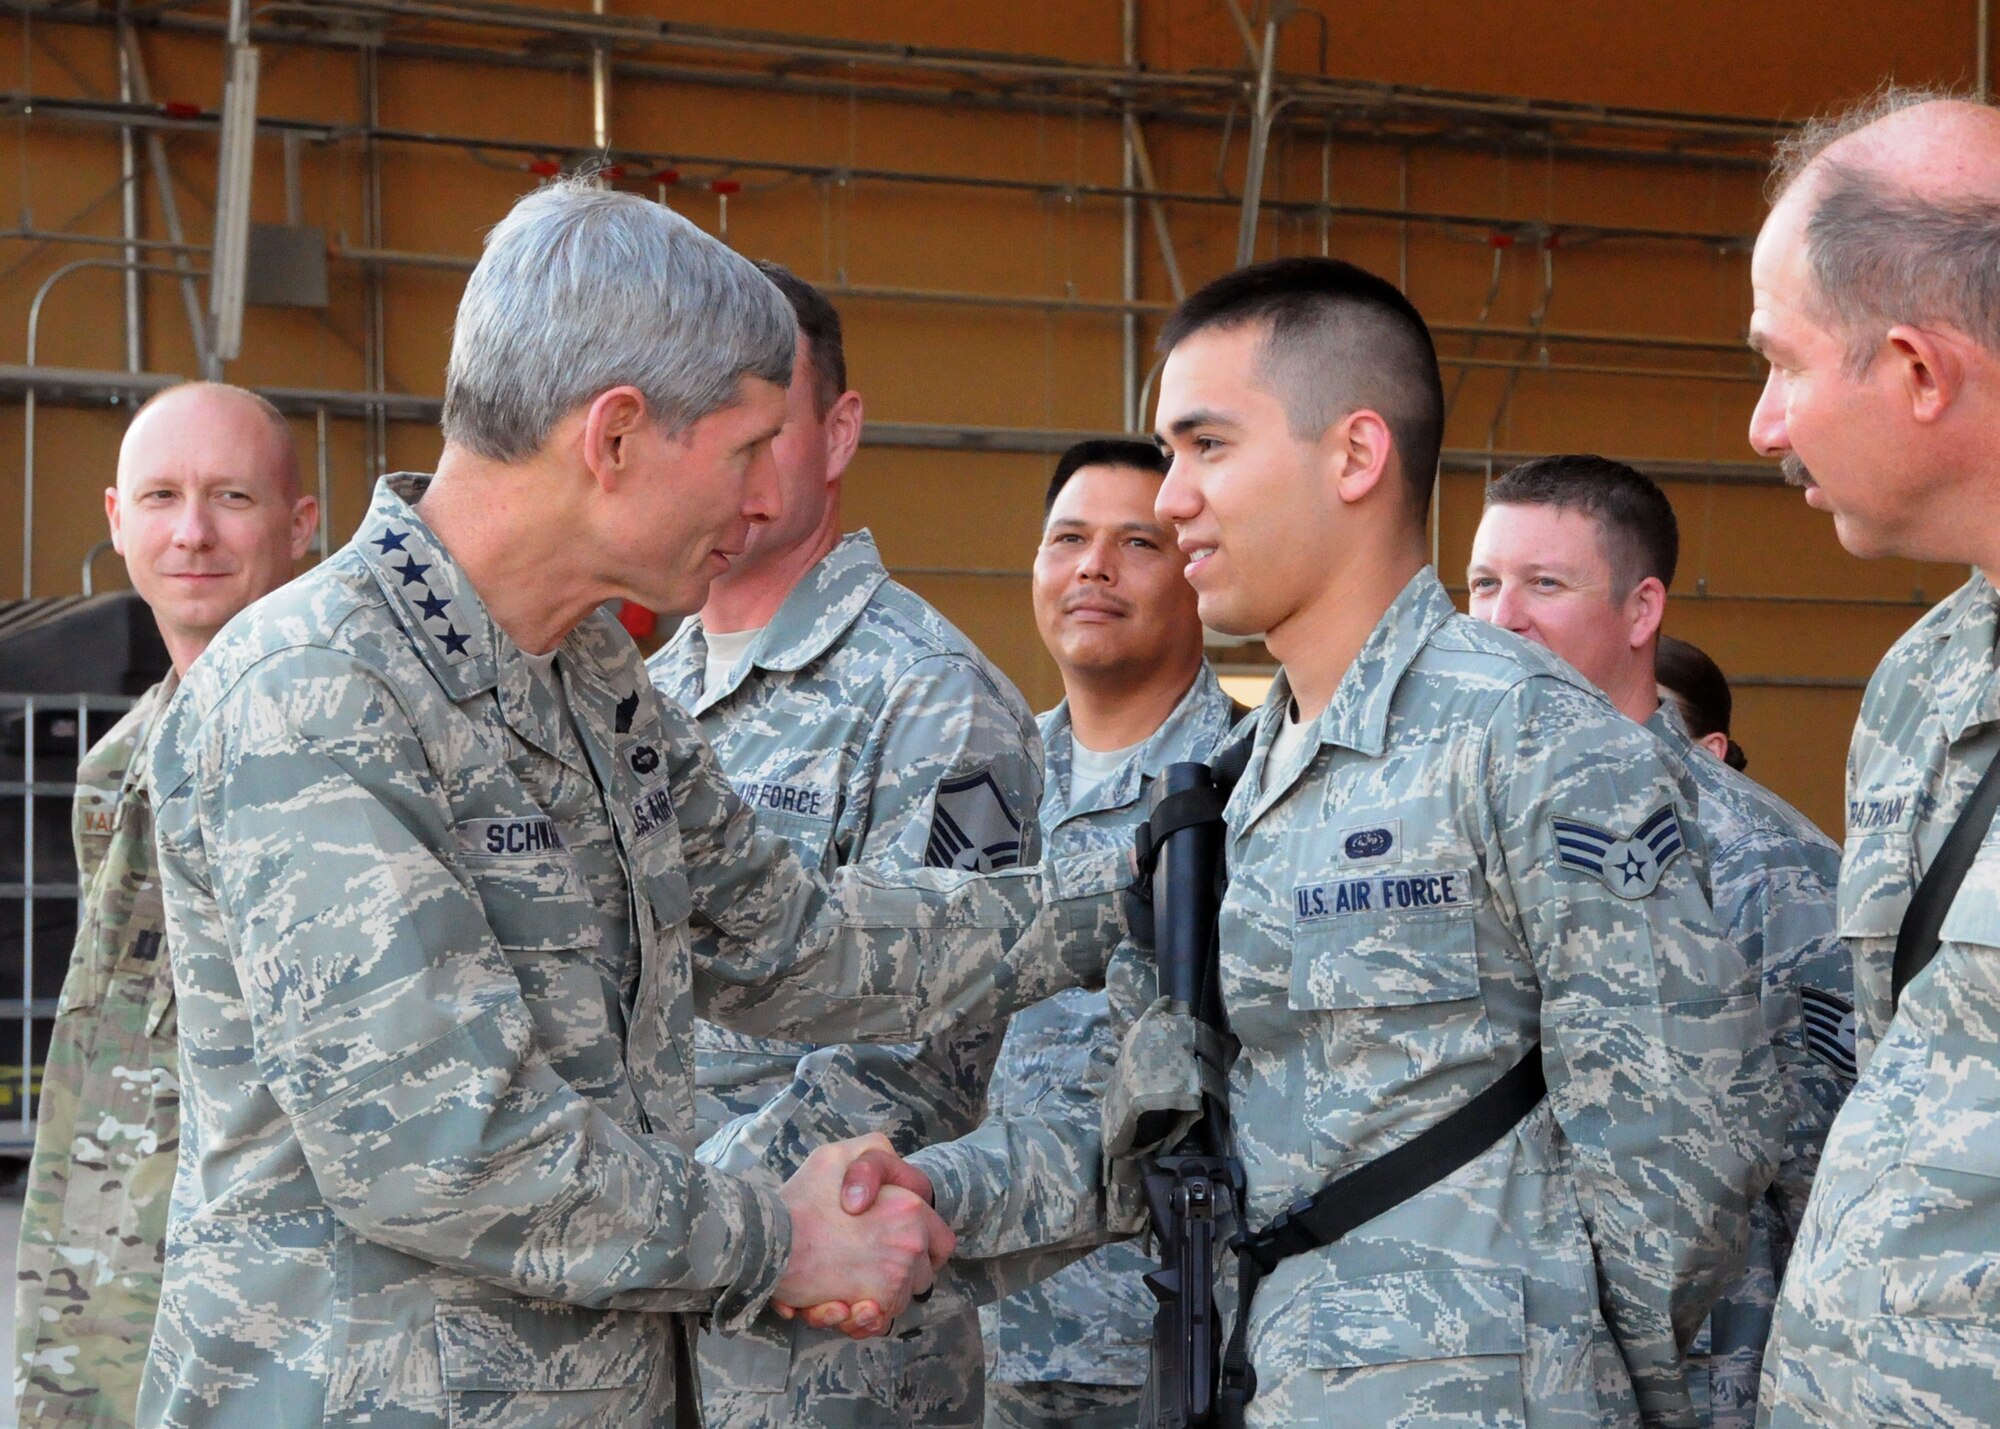 Air Force Chief of Staff Gen. Norton Schwartz greets Senior Airman Glenn Brown, a 451st Expeditionary Maintenance Group knowledge operator deployed from Patrick Air Force Base, Fla., during a visit to Kandahar Airfield, Afghanistan, April 24, 2012. Schwartz said his goal during the visit to Afghanistan was to meet and talk with as many deployed Airmen as possible.  (U.S. Air Force photo/Staff Sgt. Heather Skinkle)